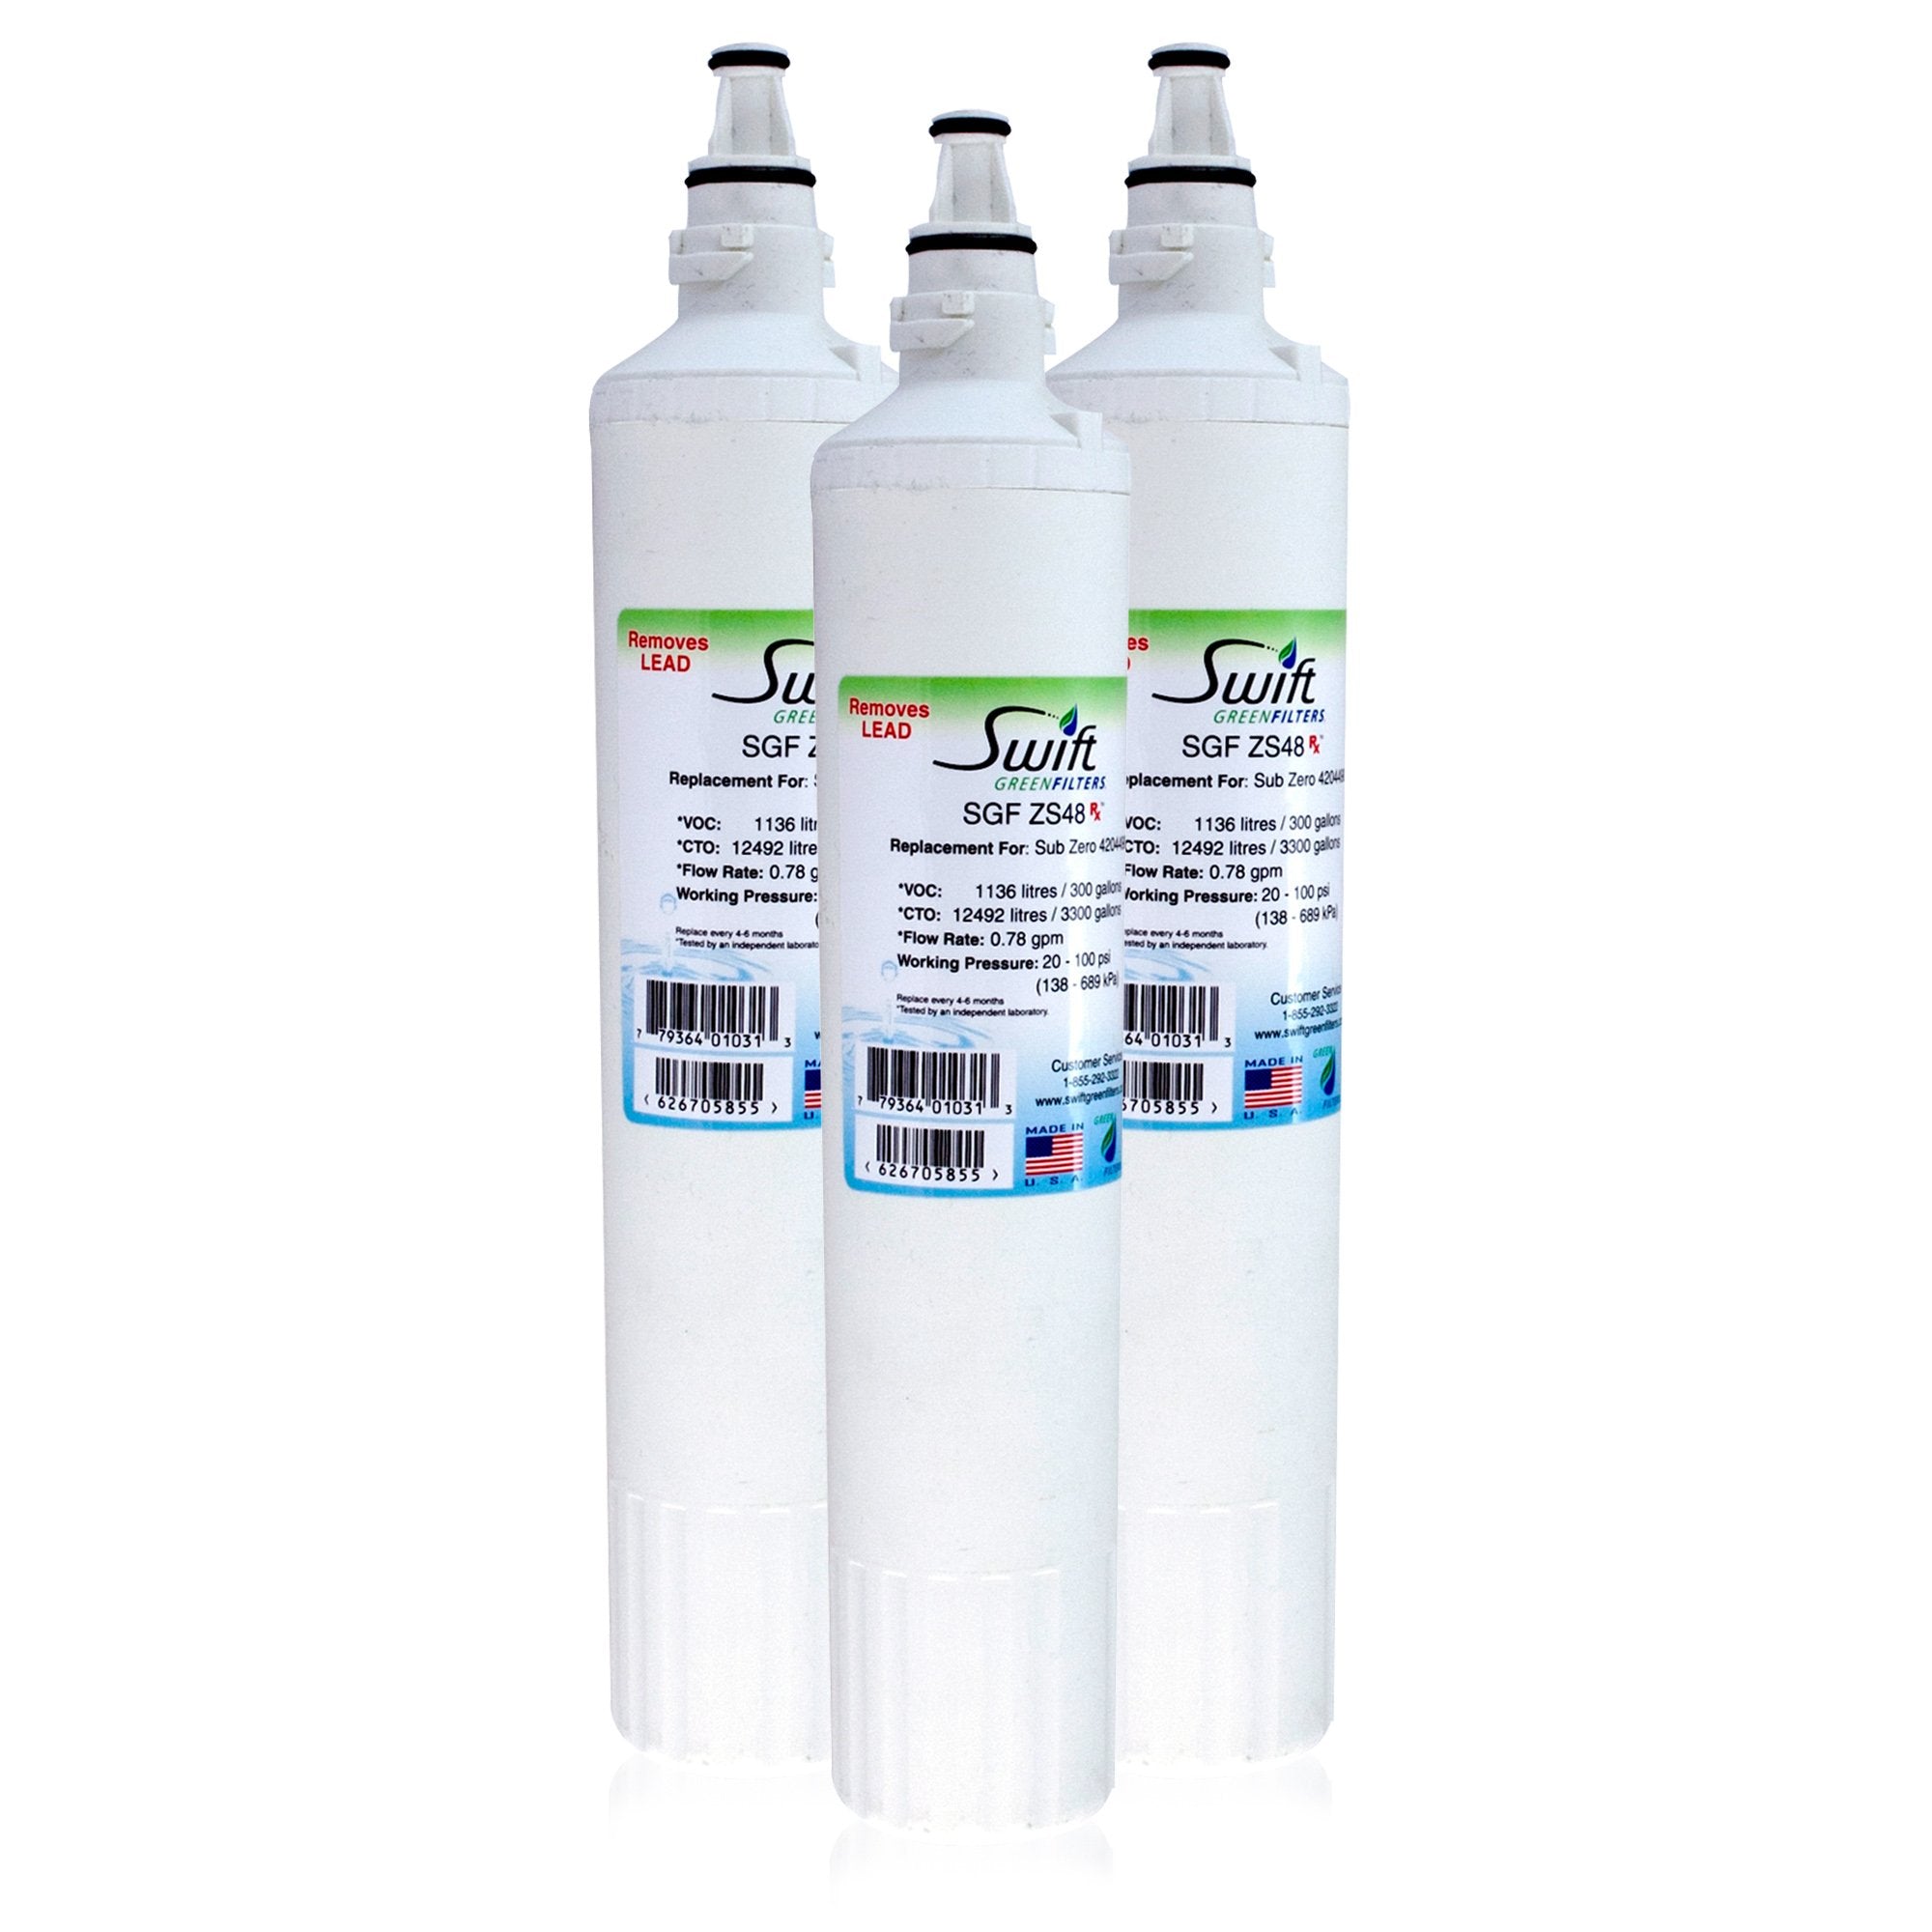 PRO 48 Compatible Pharmaceutical Refrigerator Water Filter